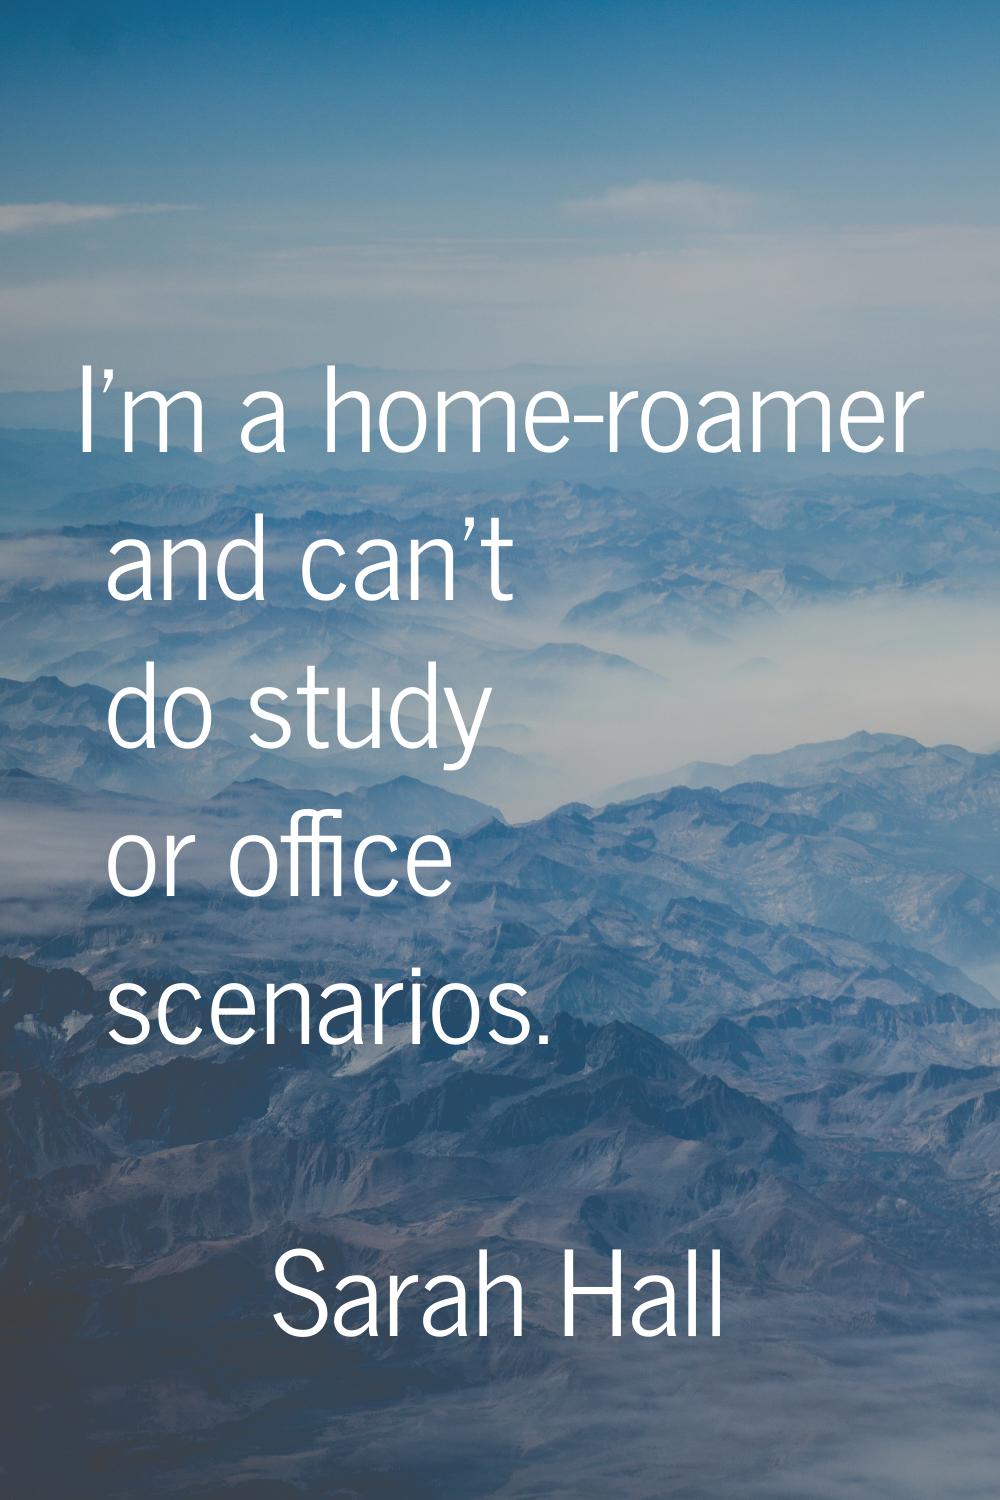 I'm a home-roamer and can't do study or office scenarios.